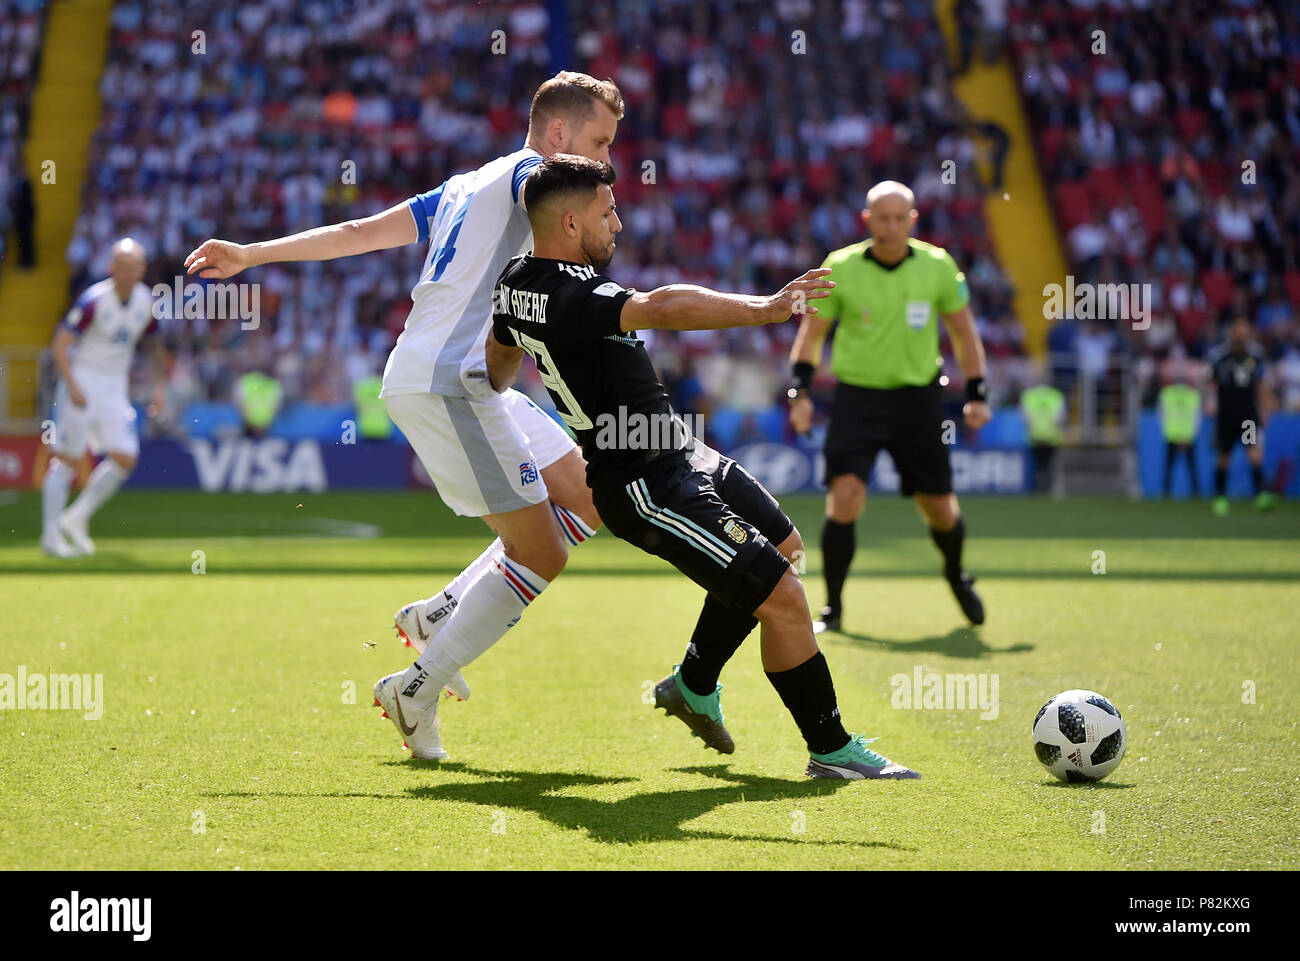 MOSCOW, RUSSIA - JUNE 16: Kari Arnason of Iceland competes with Sergio Aguero of Argentina during the 2018 FIFA World Cup Russia group D match between Argentina and Iceland at Spartak Stadium on June 16, 2018 in Moscow, Russia. (Photo by Lukasz Laskowski/PressFocus/MB Media) Stock Photo